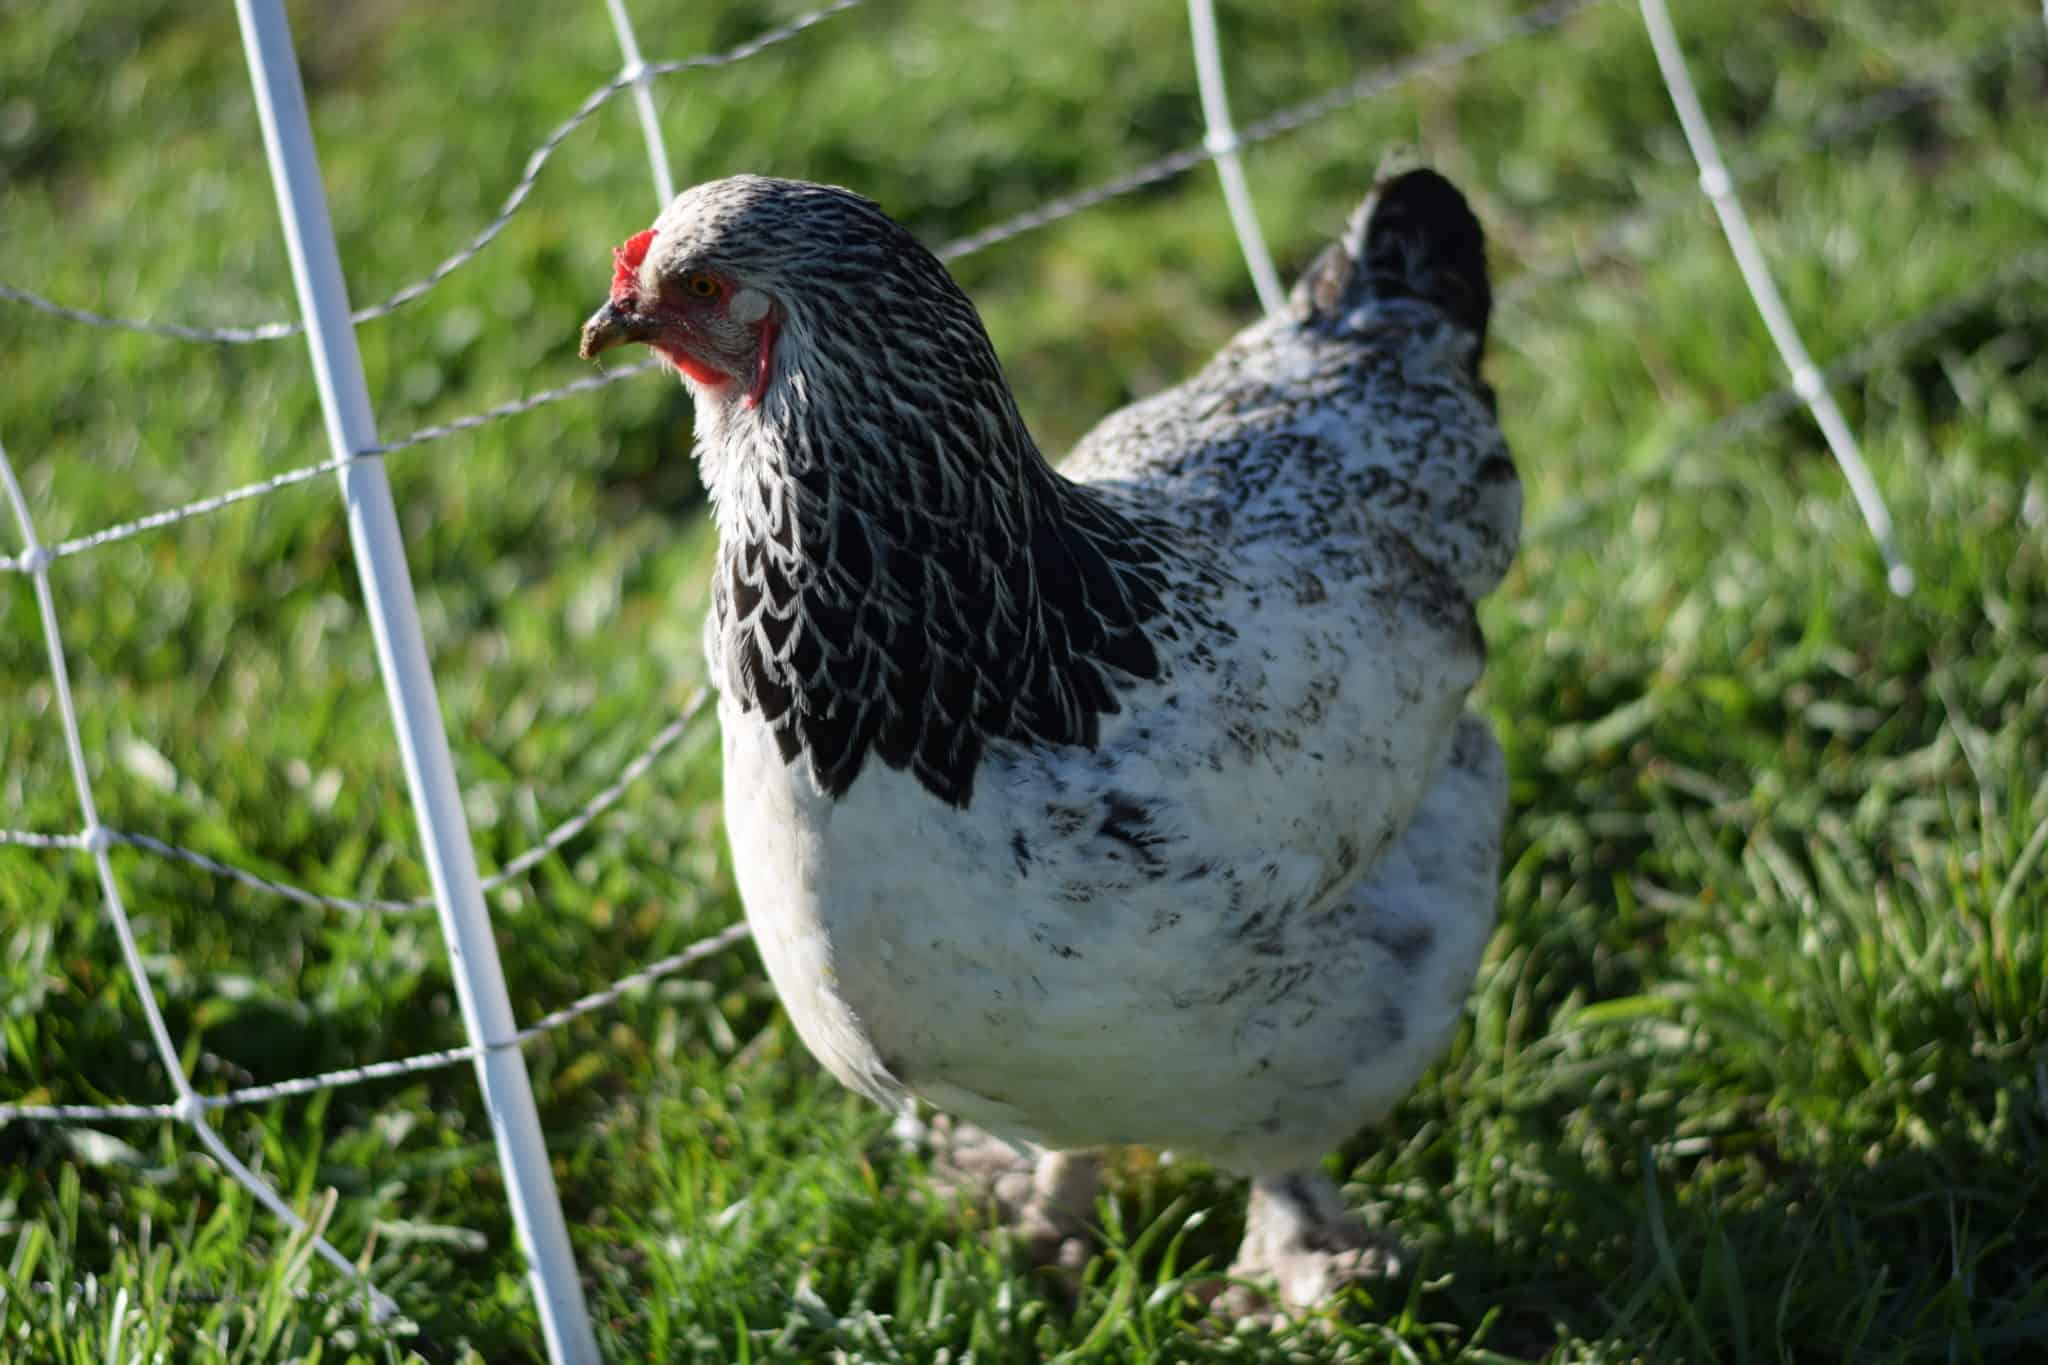 brahma chicken standing next to an electric fence